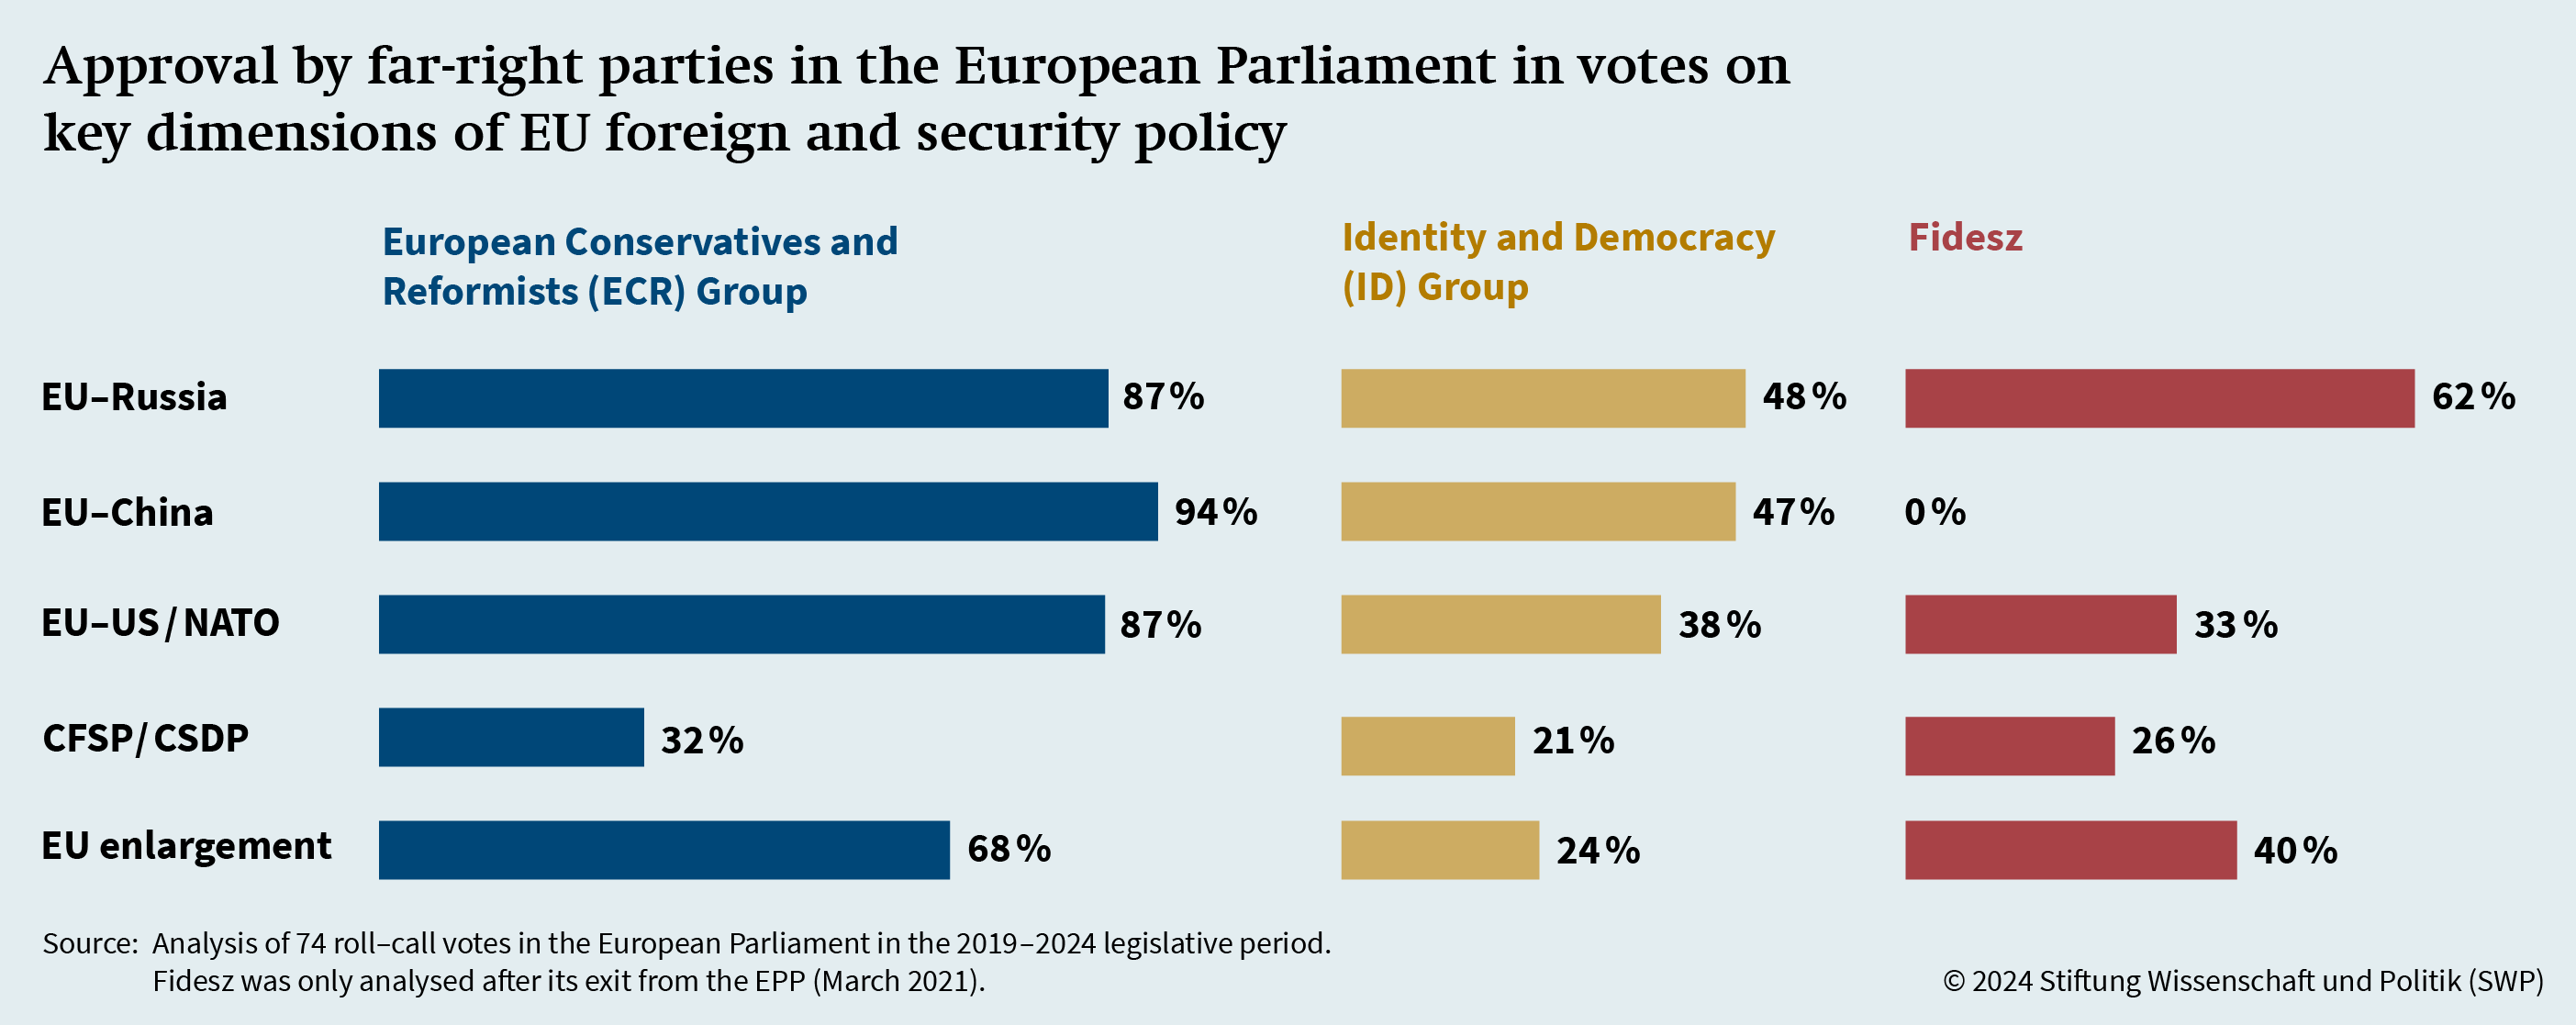 Figure: Approval by far-right parties in the European Parliament in votes on key dimensions of EU foreign and security policy